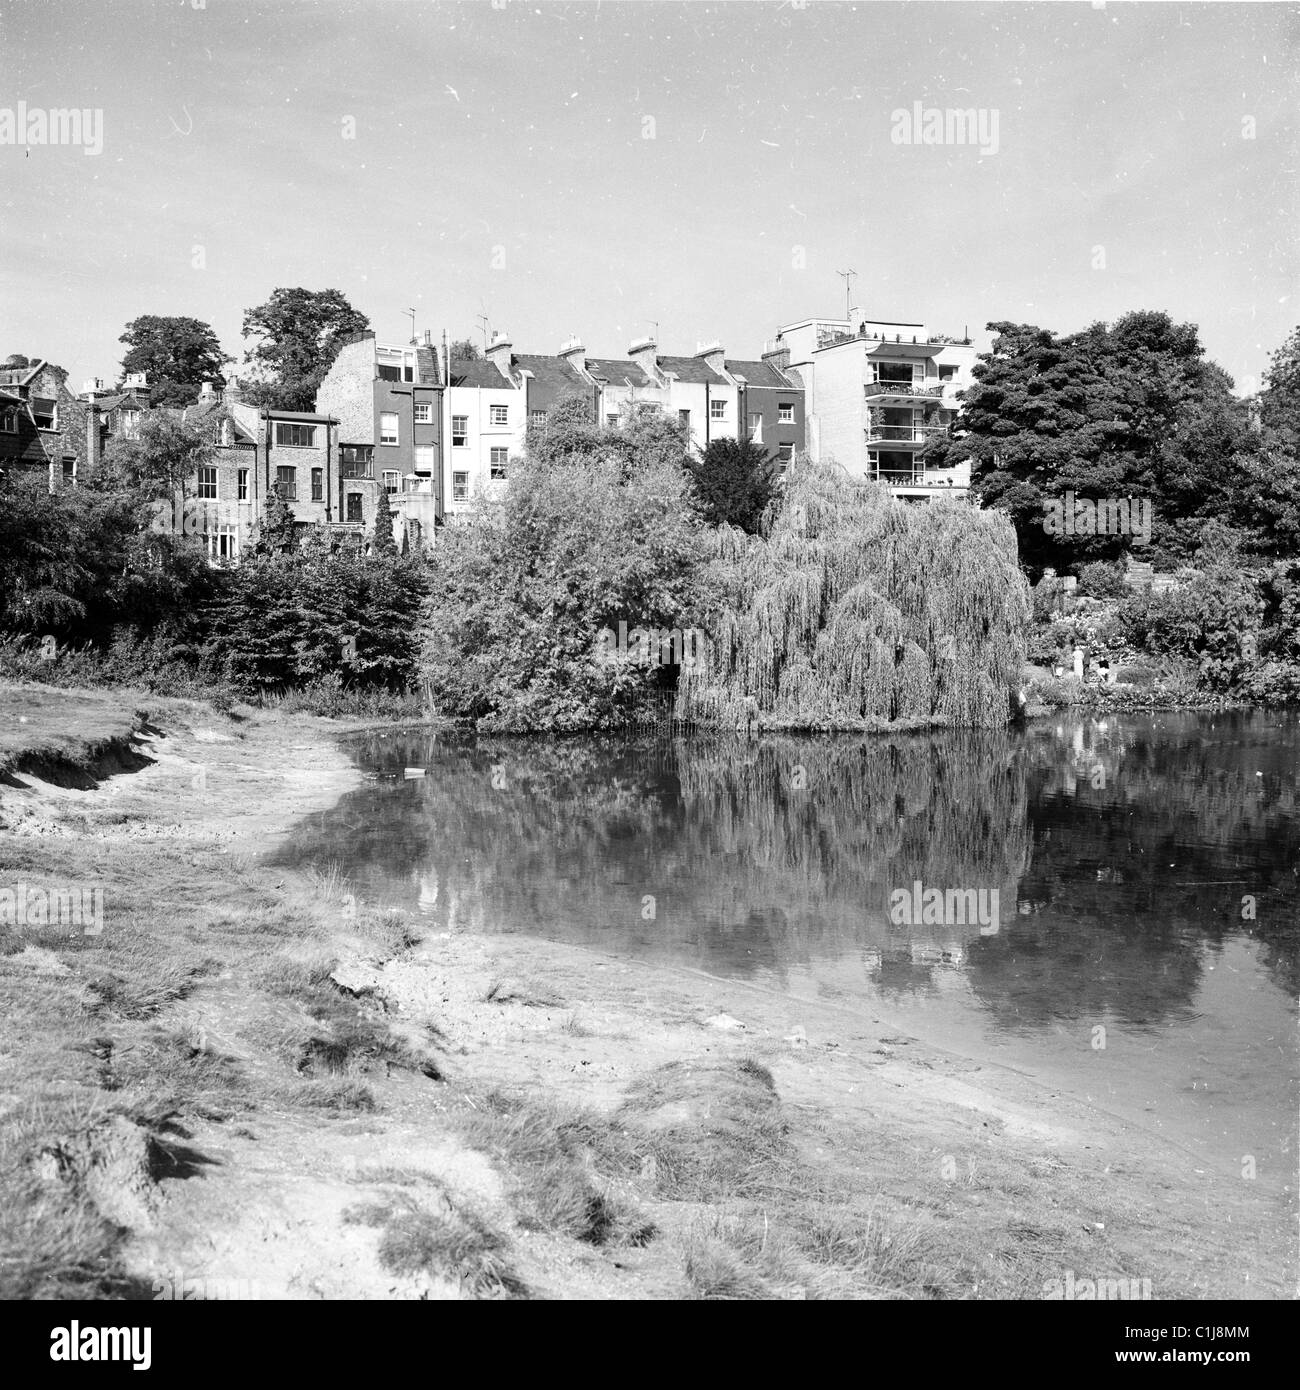 1950s, houses overlooking a small lake, Hampstead Heath, North London. Stock Photo